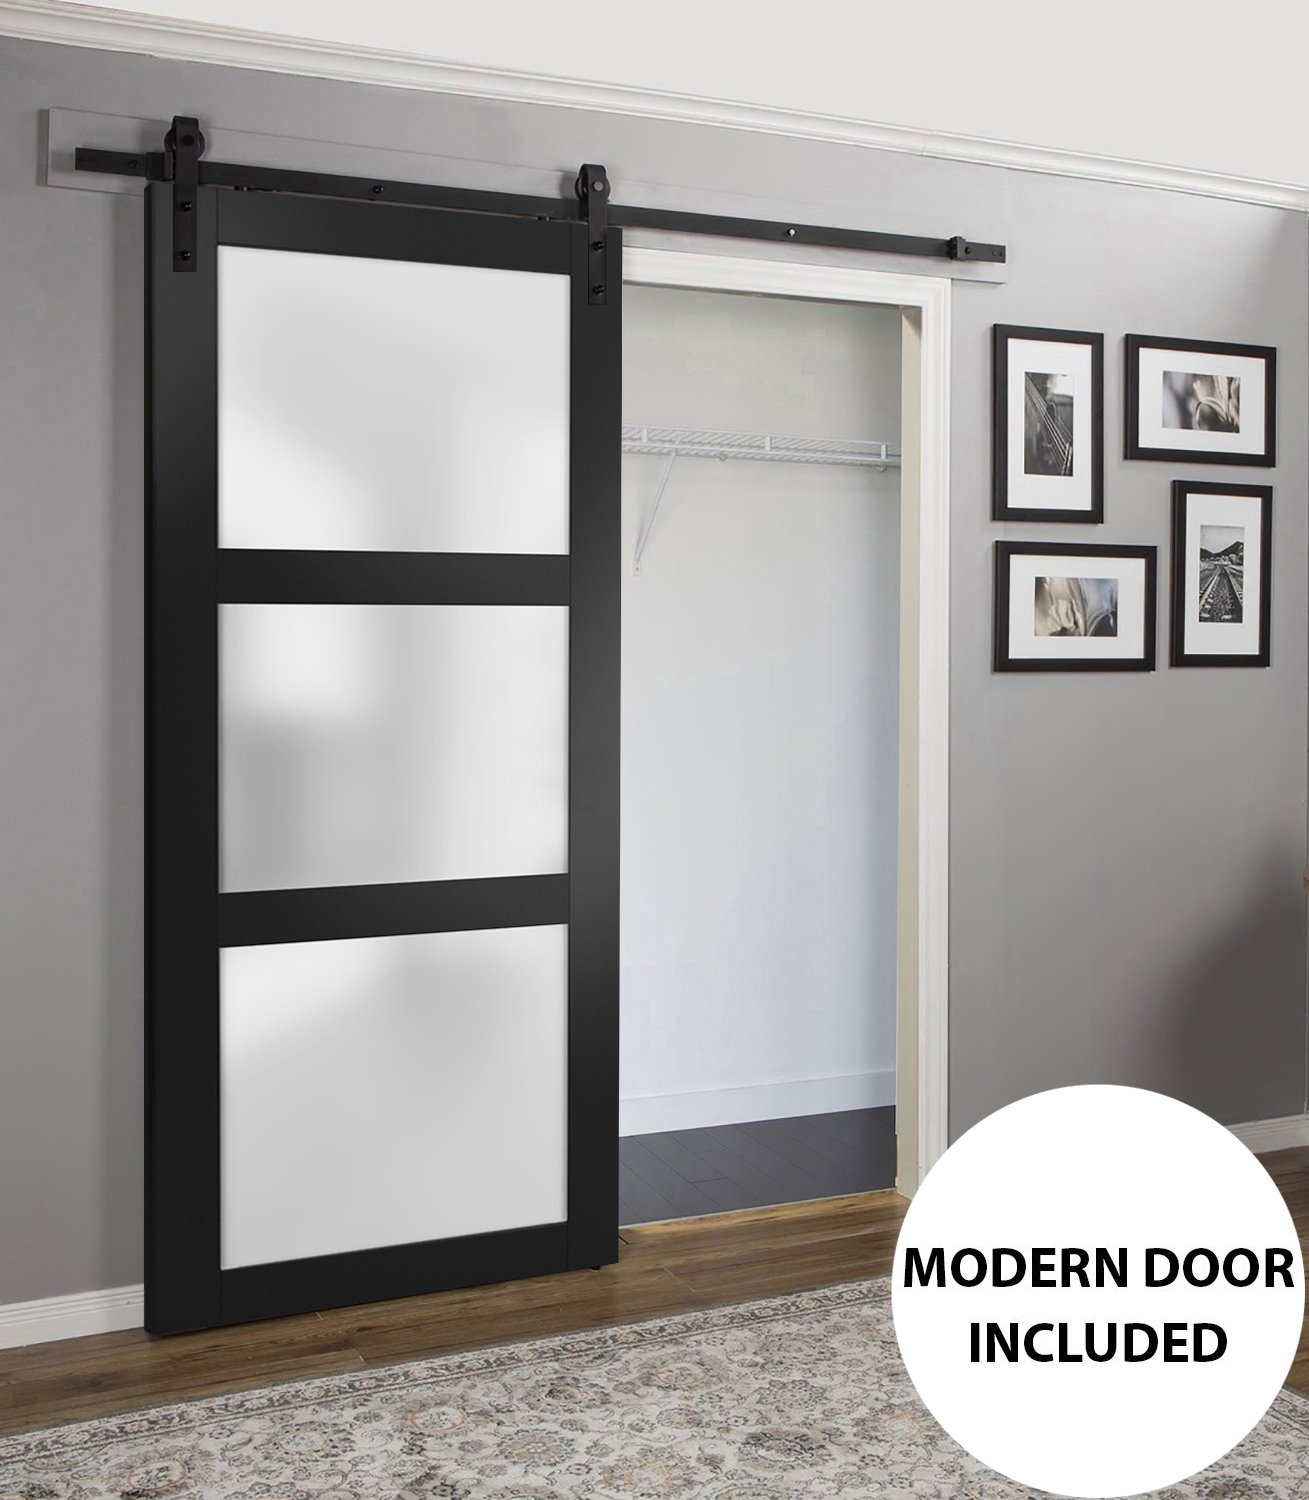  ARKHJEM Double 30''x84'' Frosted Glass Barn Door x 2